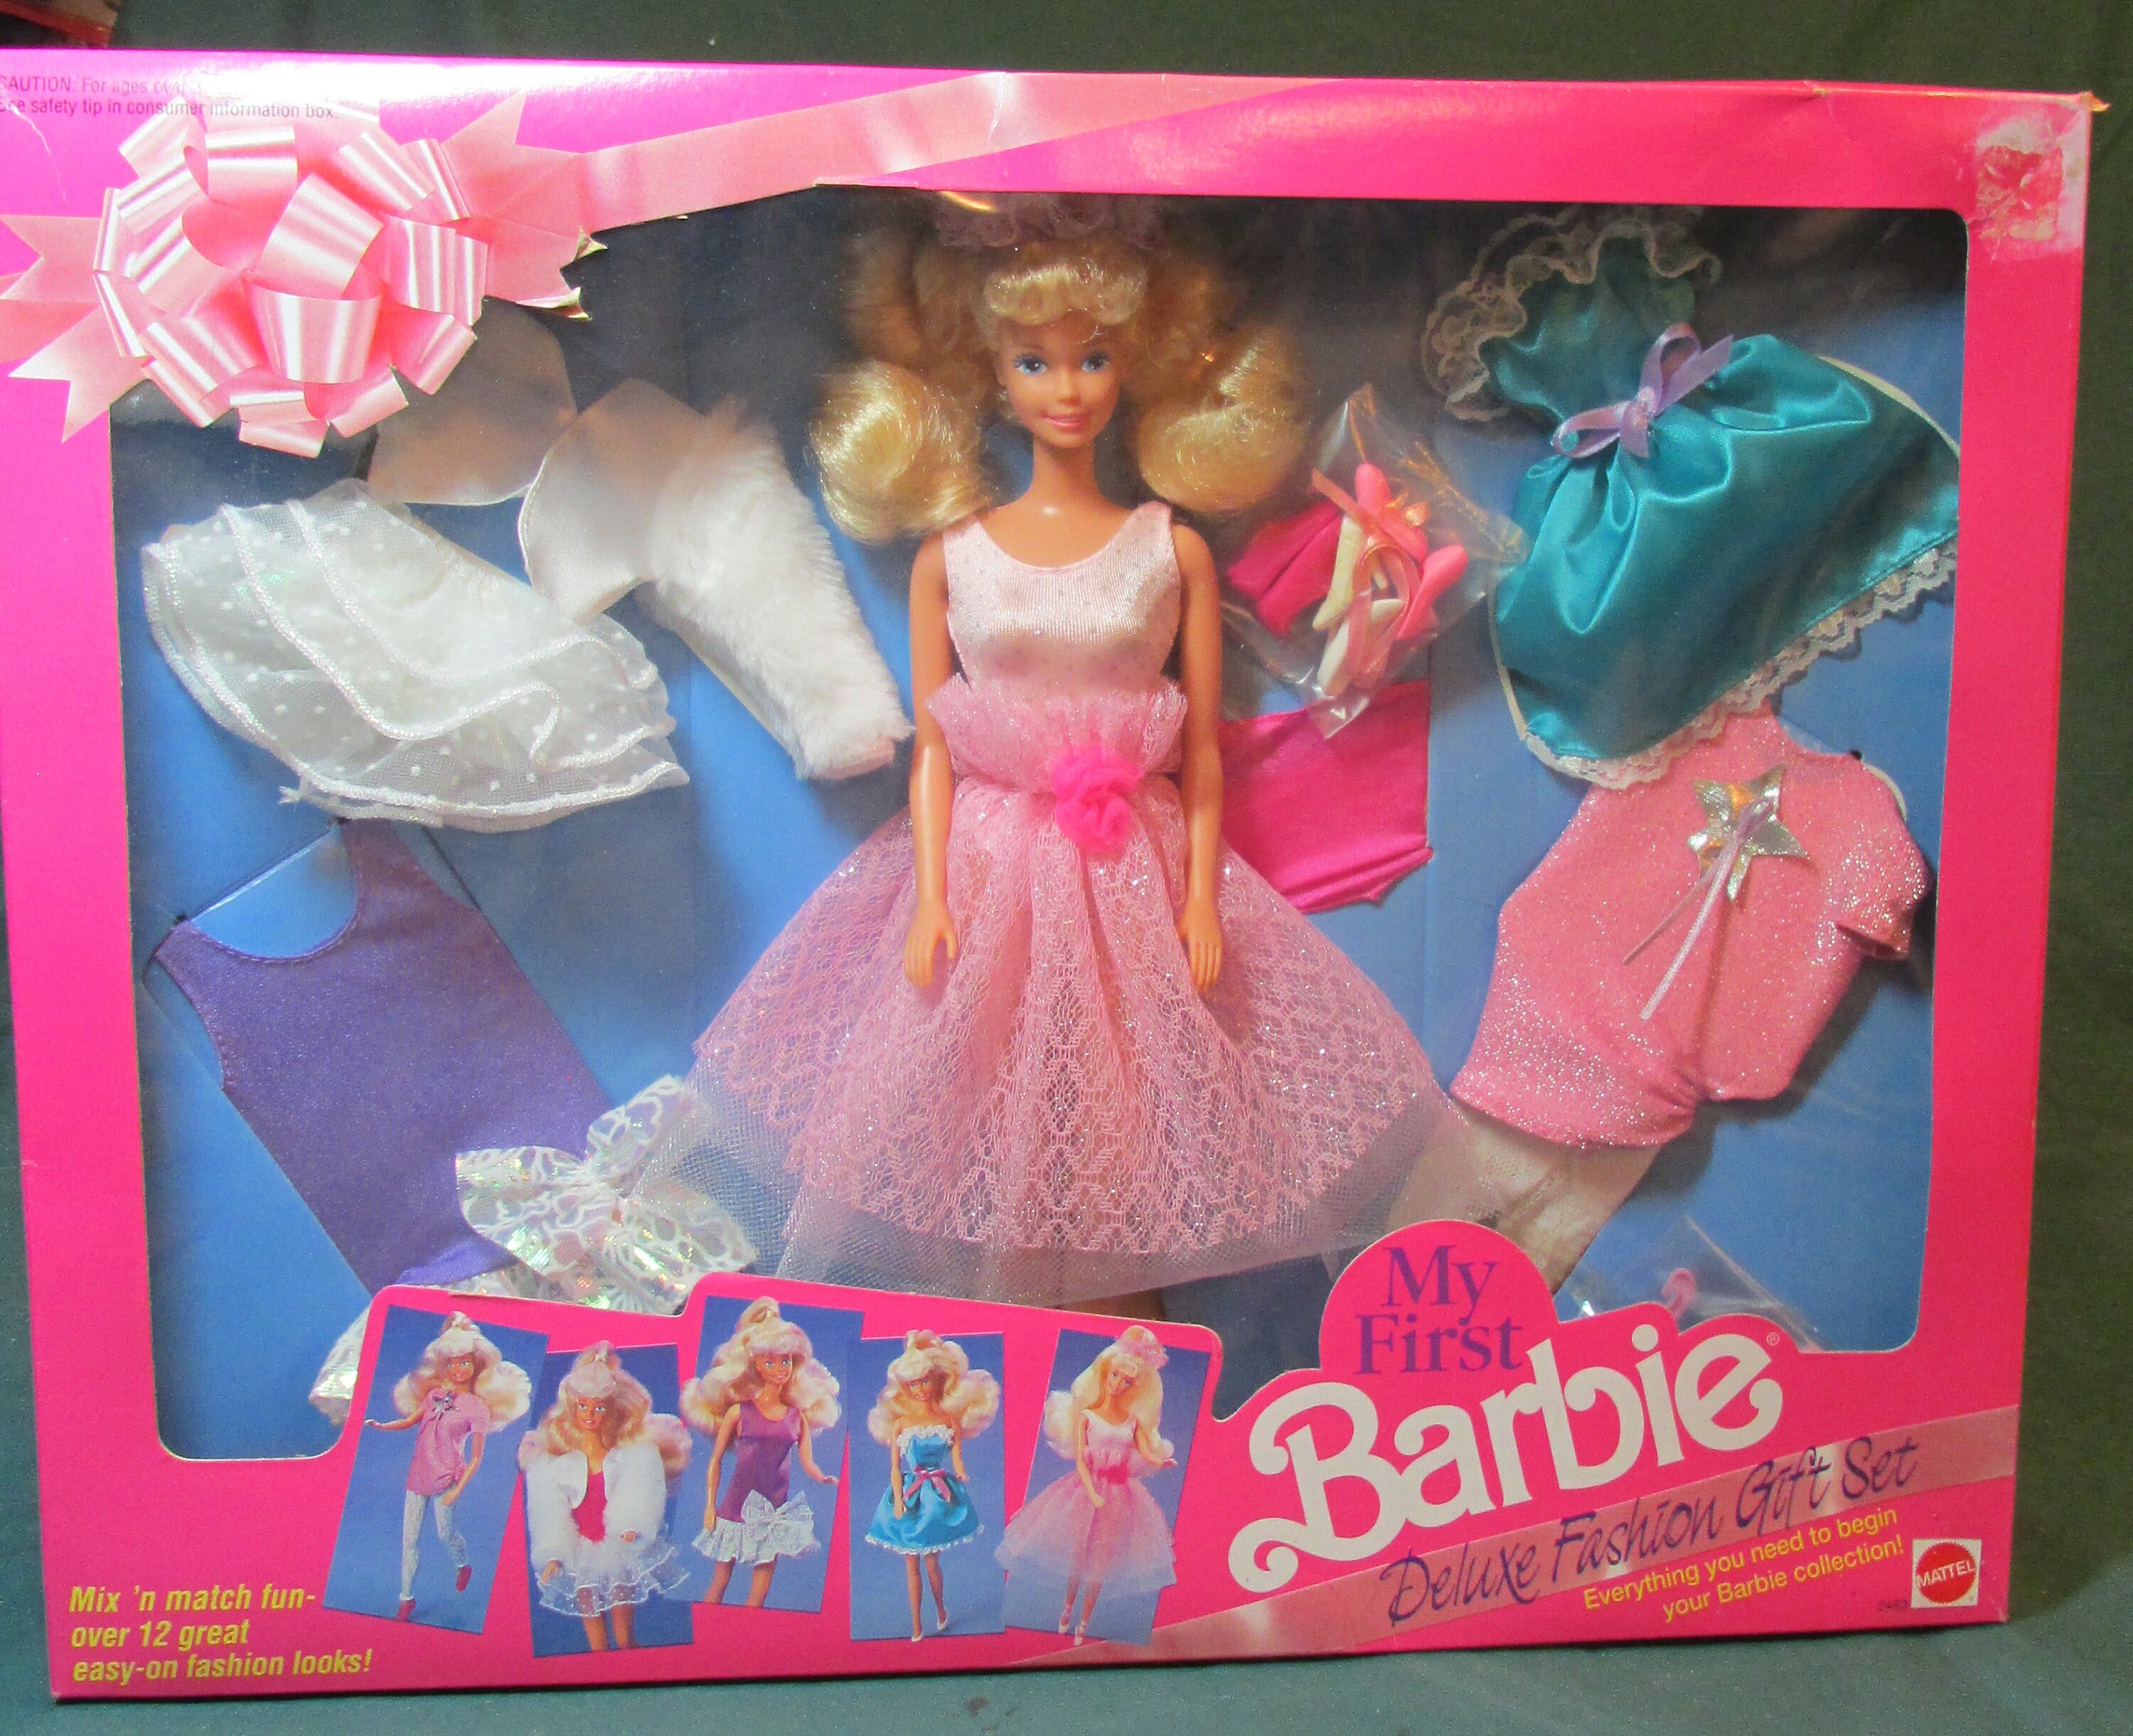 Umoderne kom videre motto My First Barbie Deluxe Fashion Gift Set Doll & Outfits - Etsy